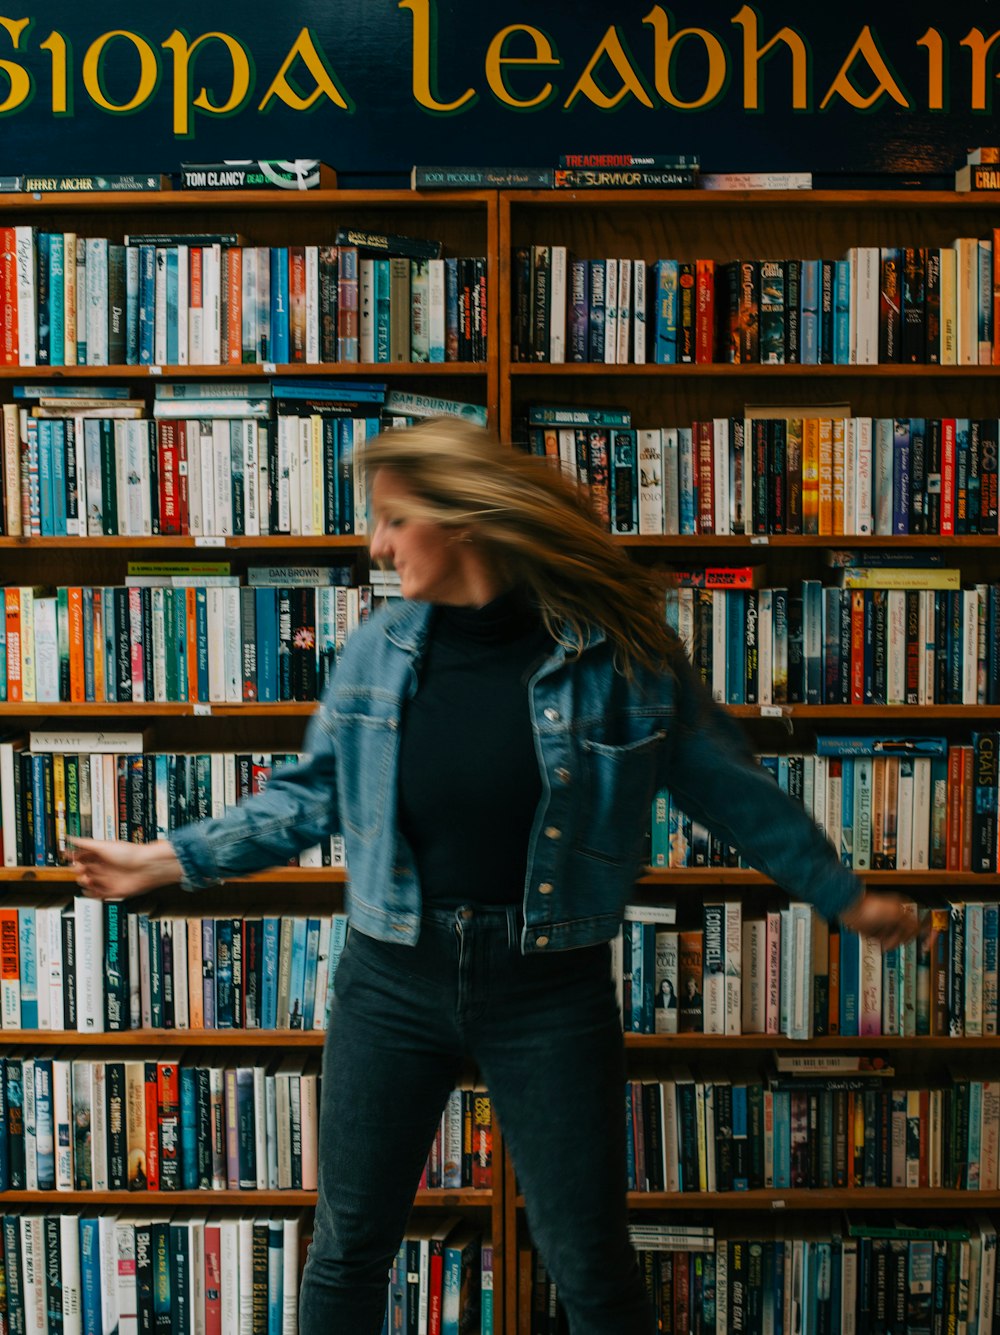 a woman standing in front of a bookshelf full of books